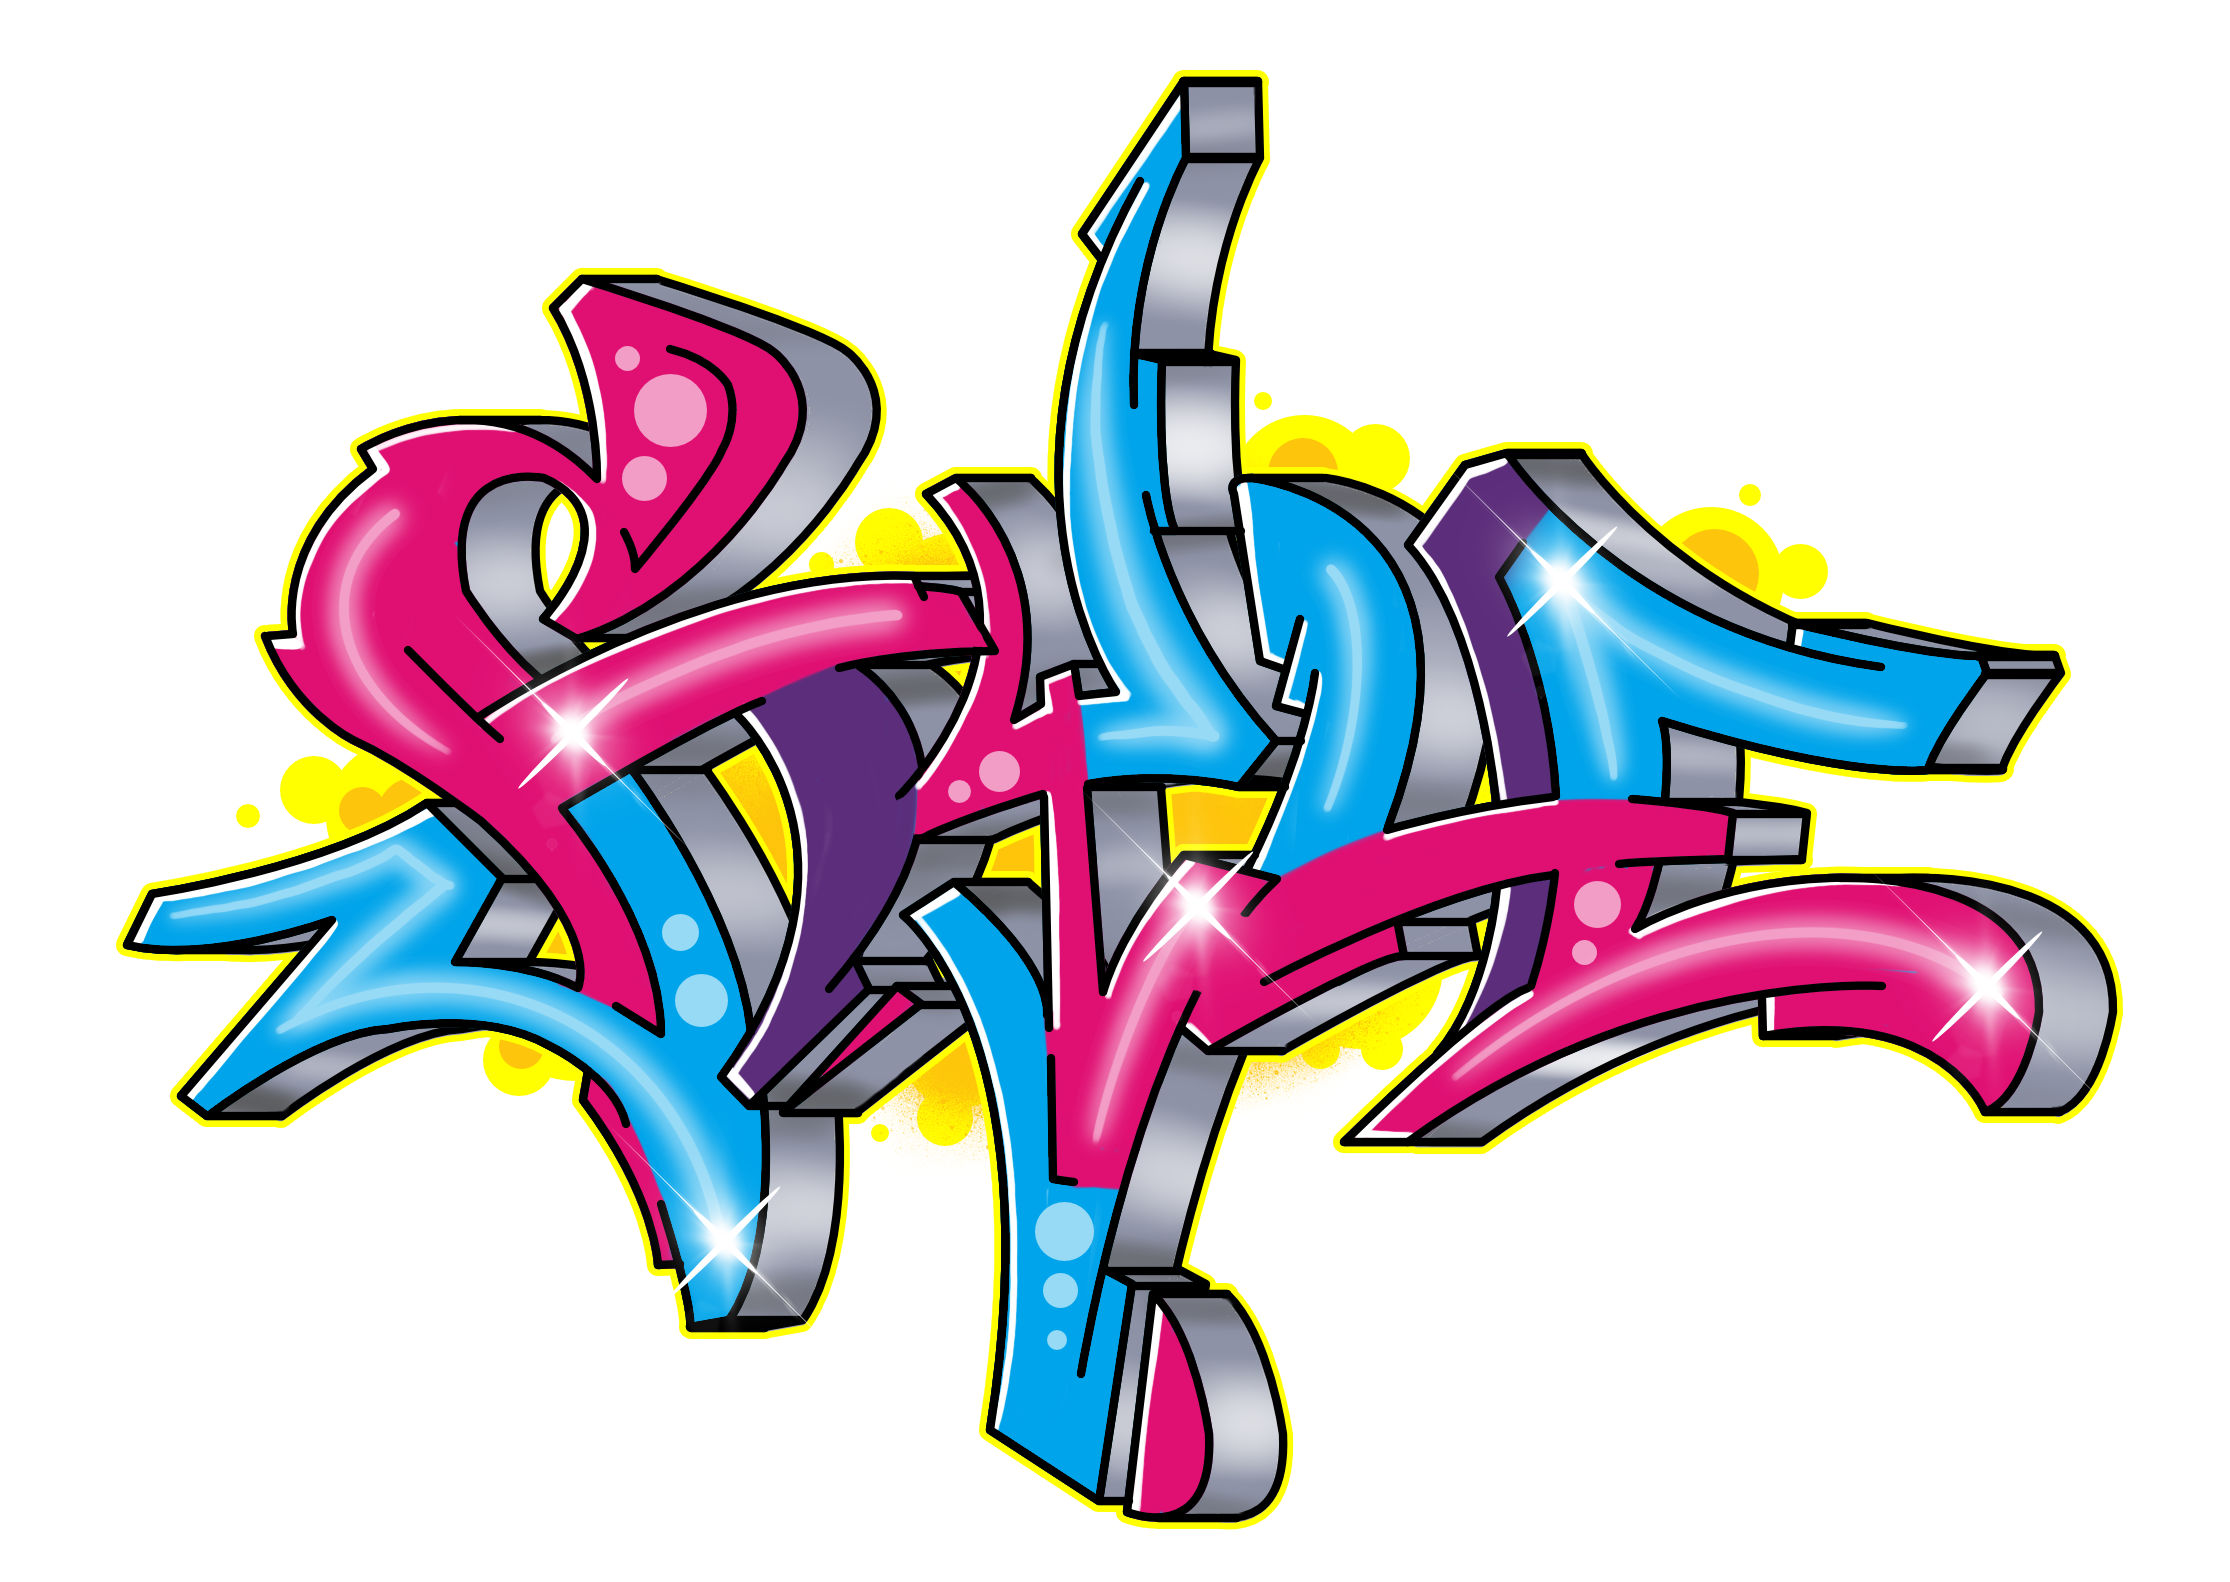 How to Draw “Style” in Graffiti in 15 Steps